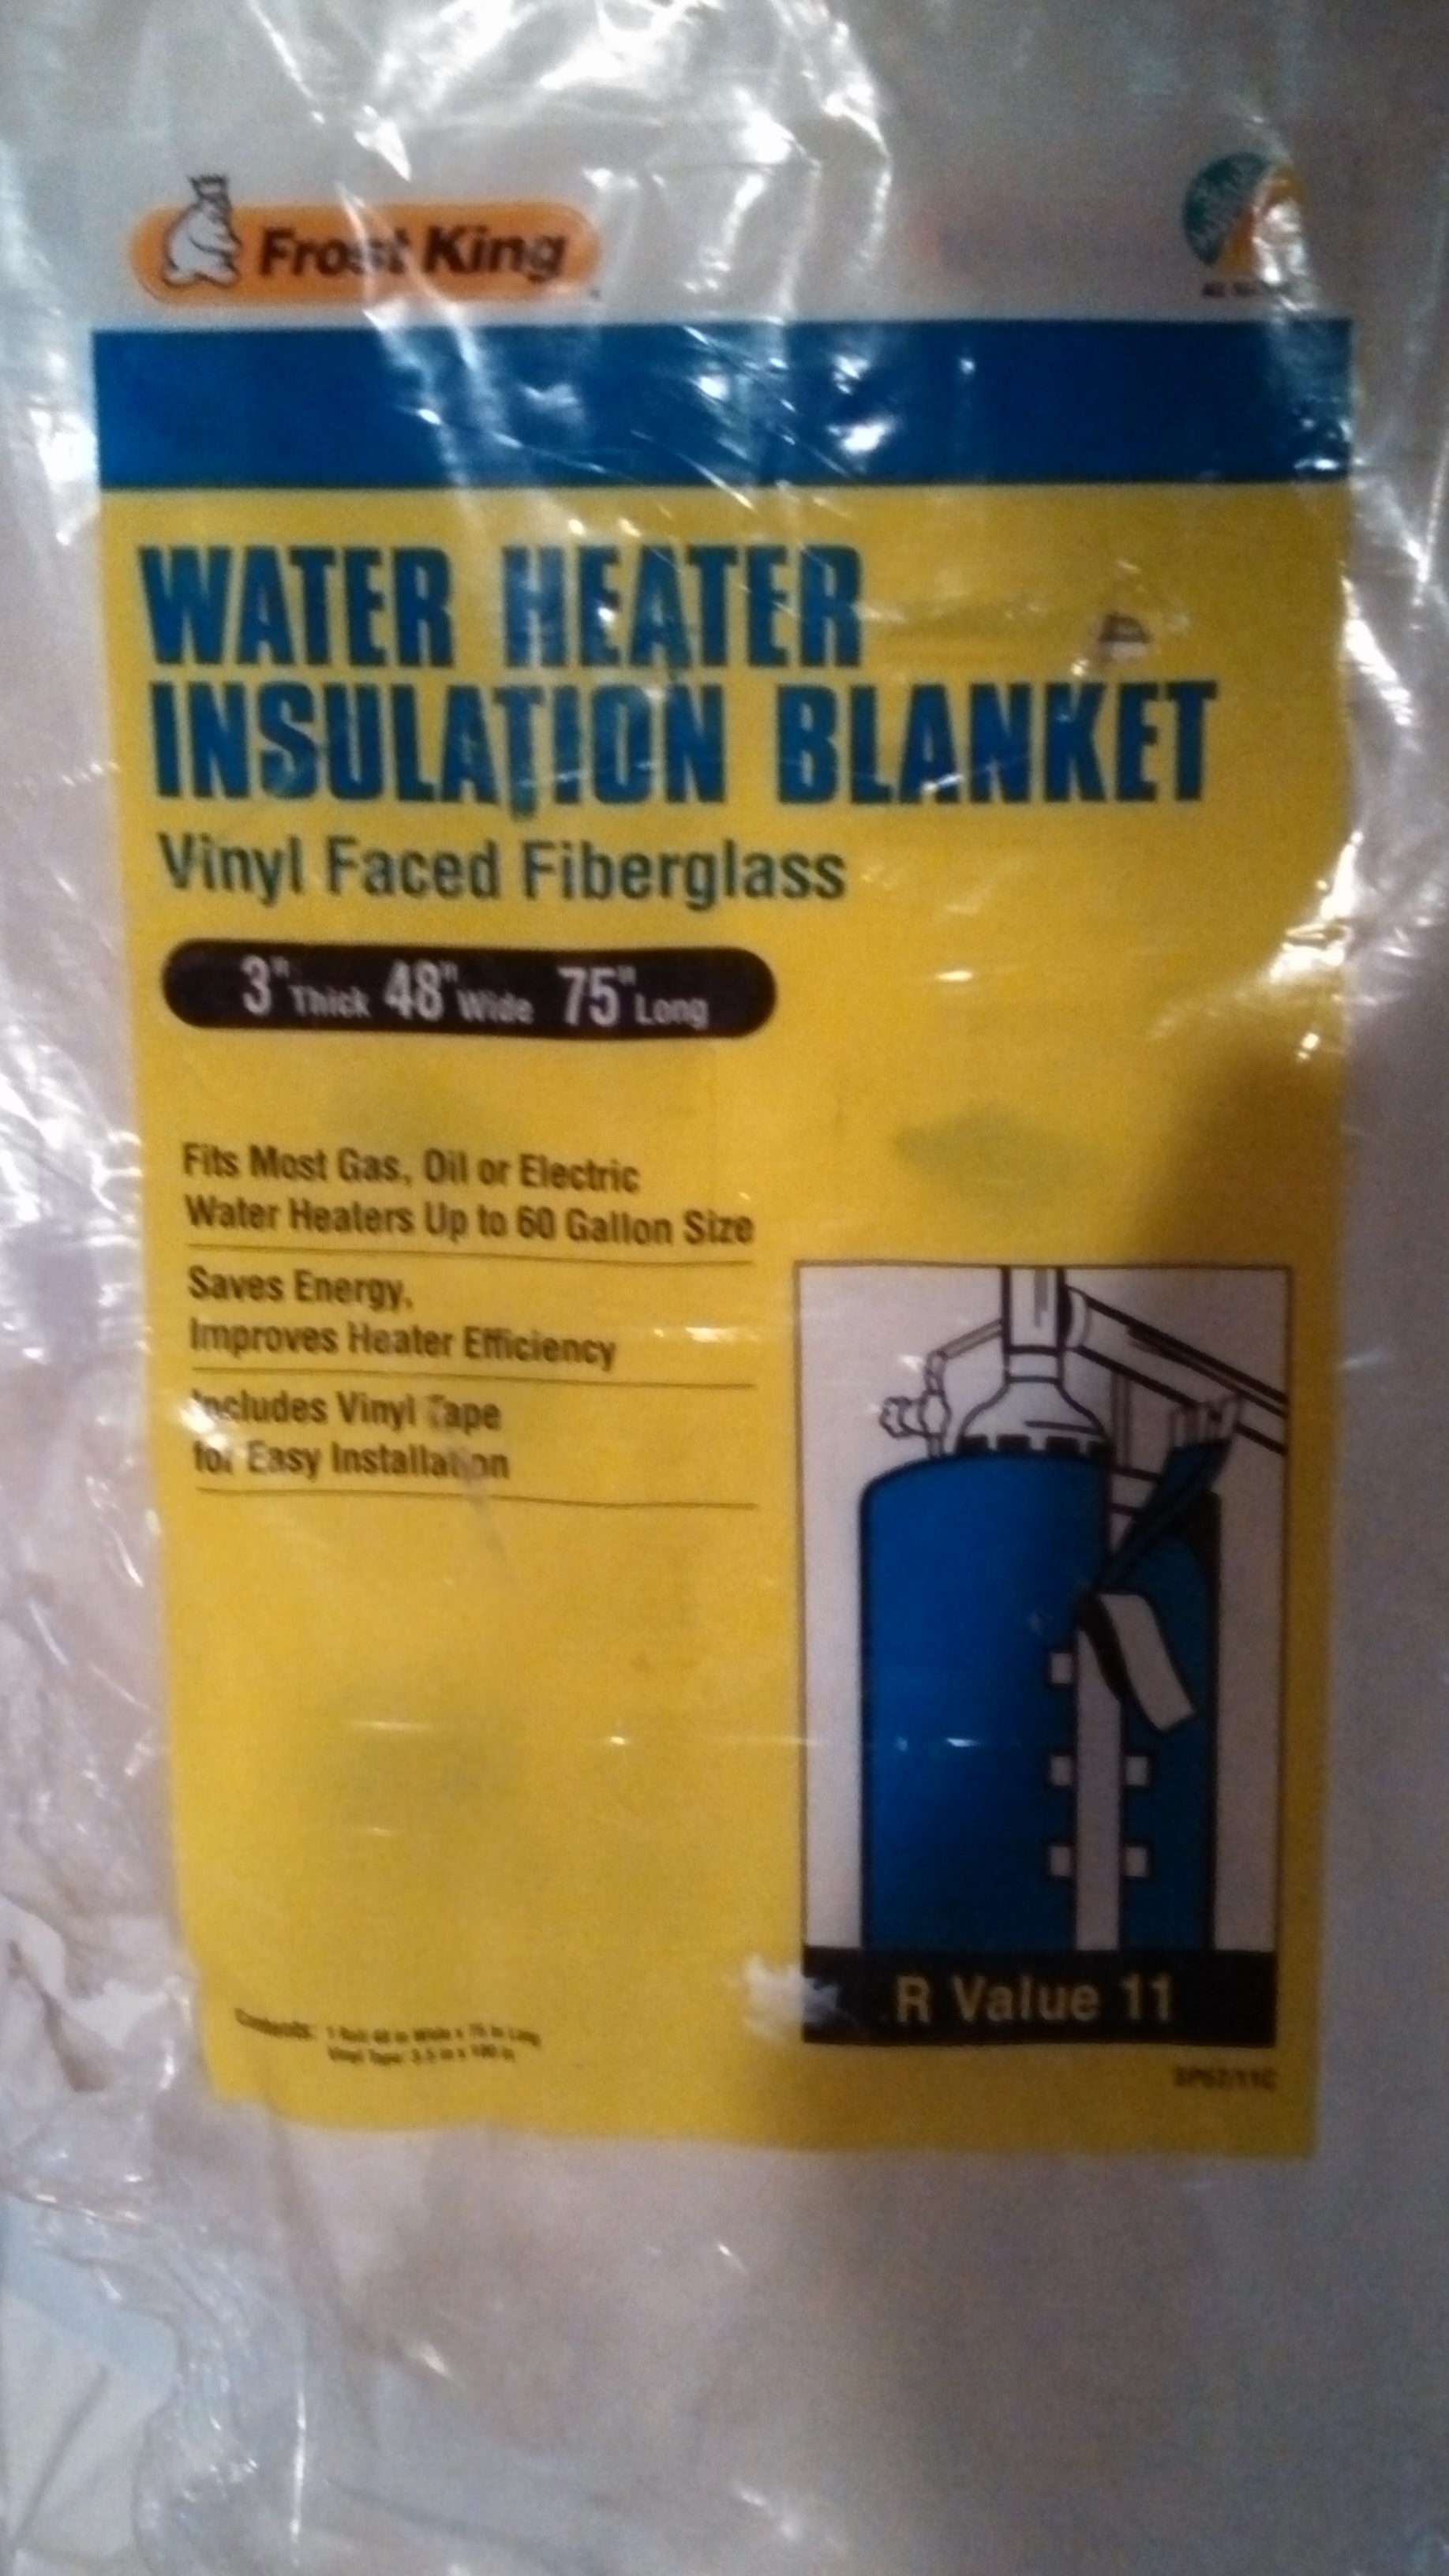 Going Green? Give Your Water Heater a Blanket